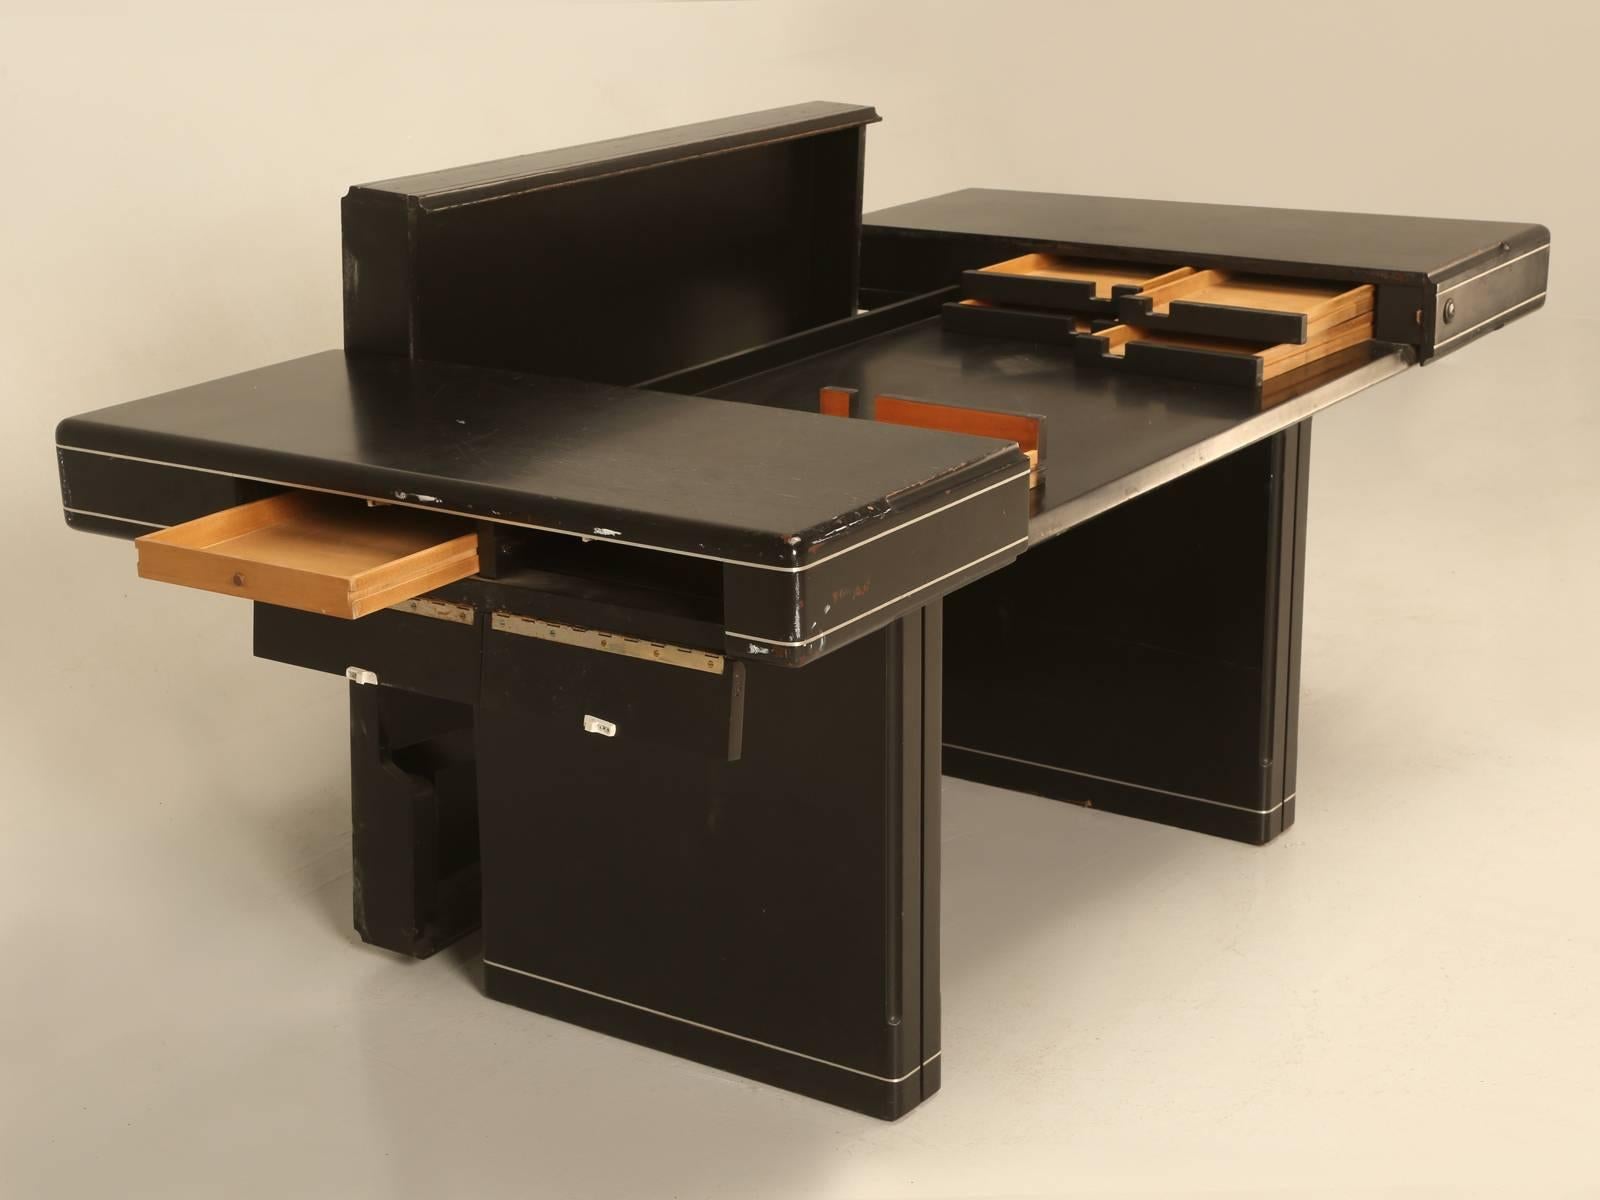 Late 20th Century American Mid-Century Modern Desk and Dining Table Combination Made in Chicago